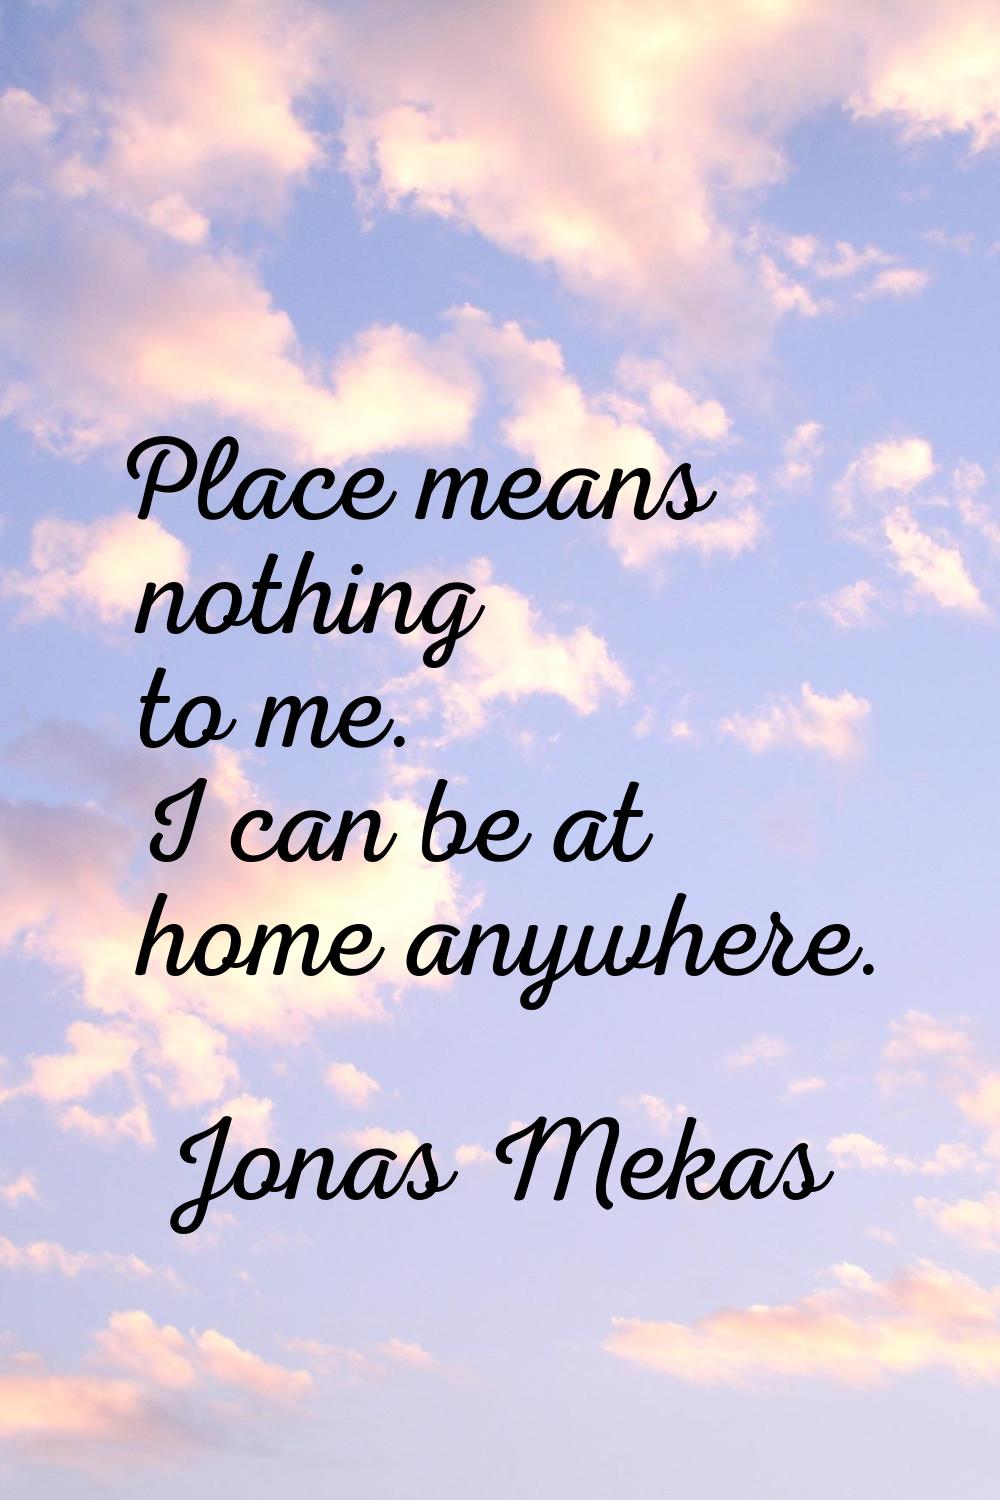 Place means nothing to me. I can be at home anywhere.